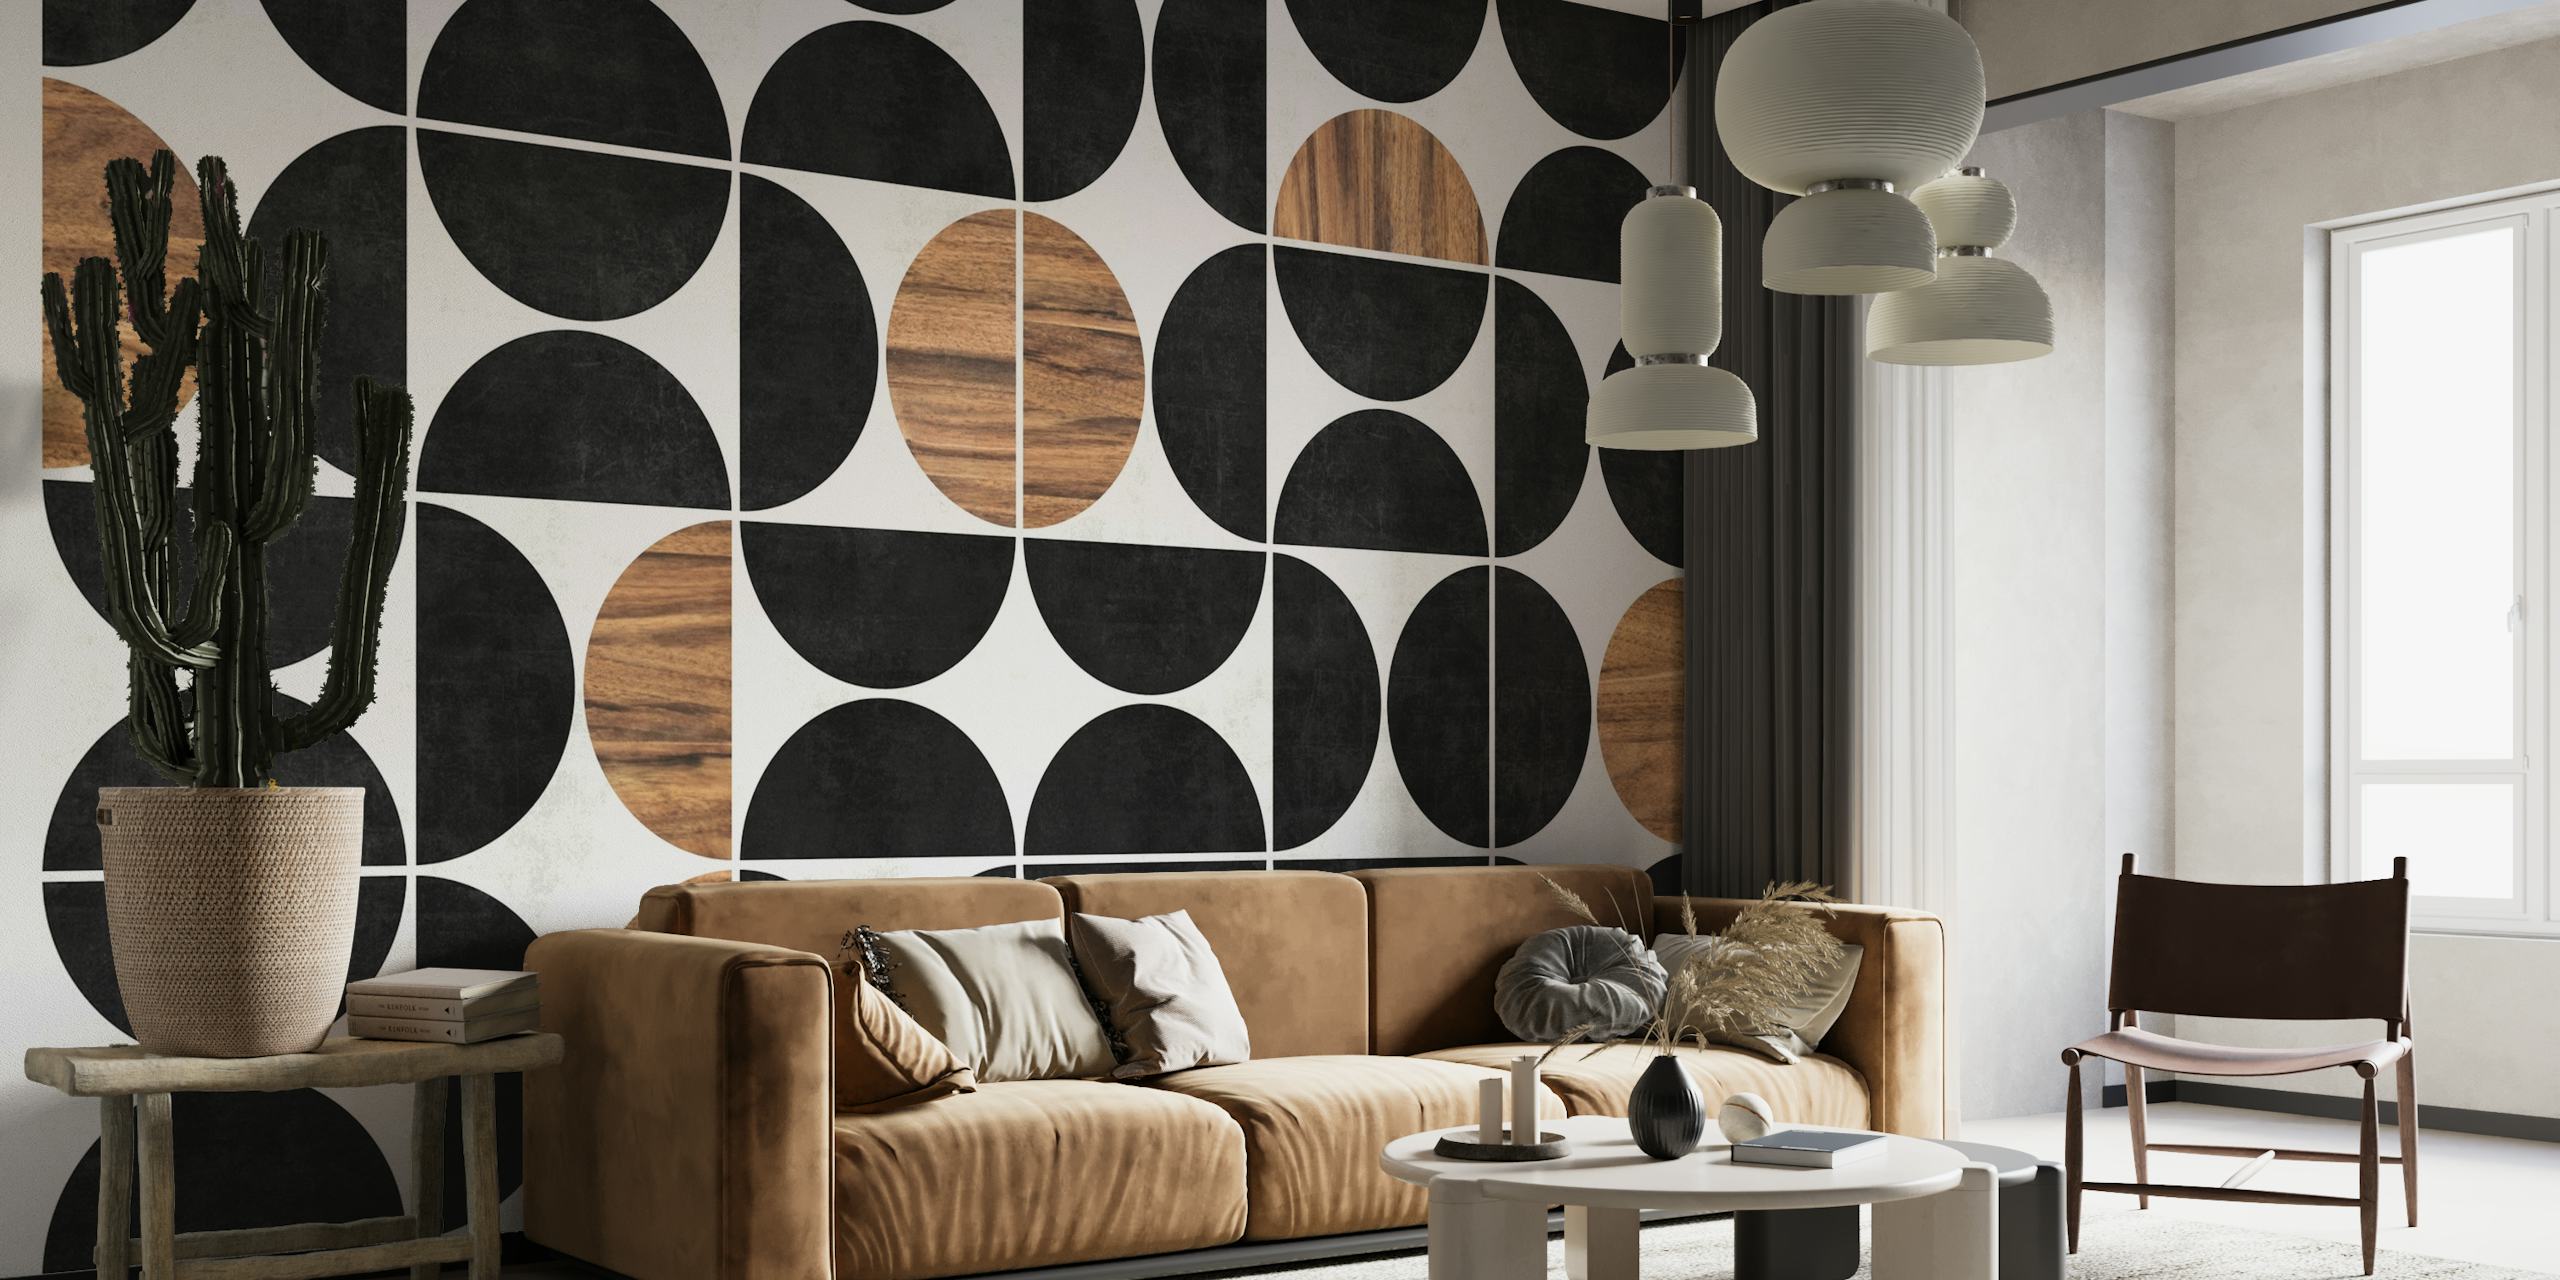 Geometric Mid-Century Modern Pattern No1 wallpaper displaying a mix of wood and concrete textures